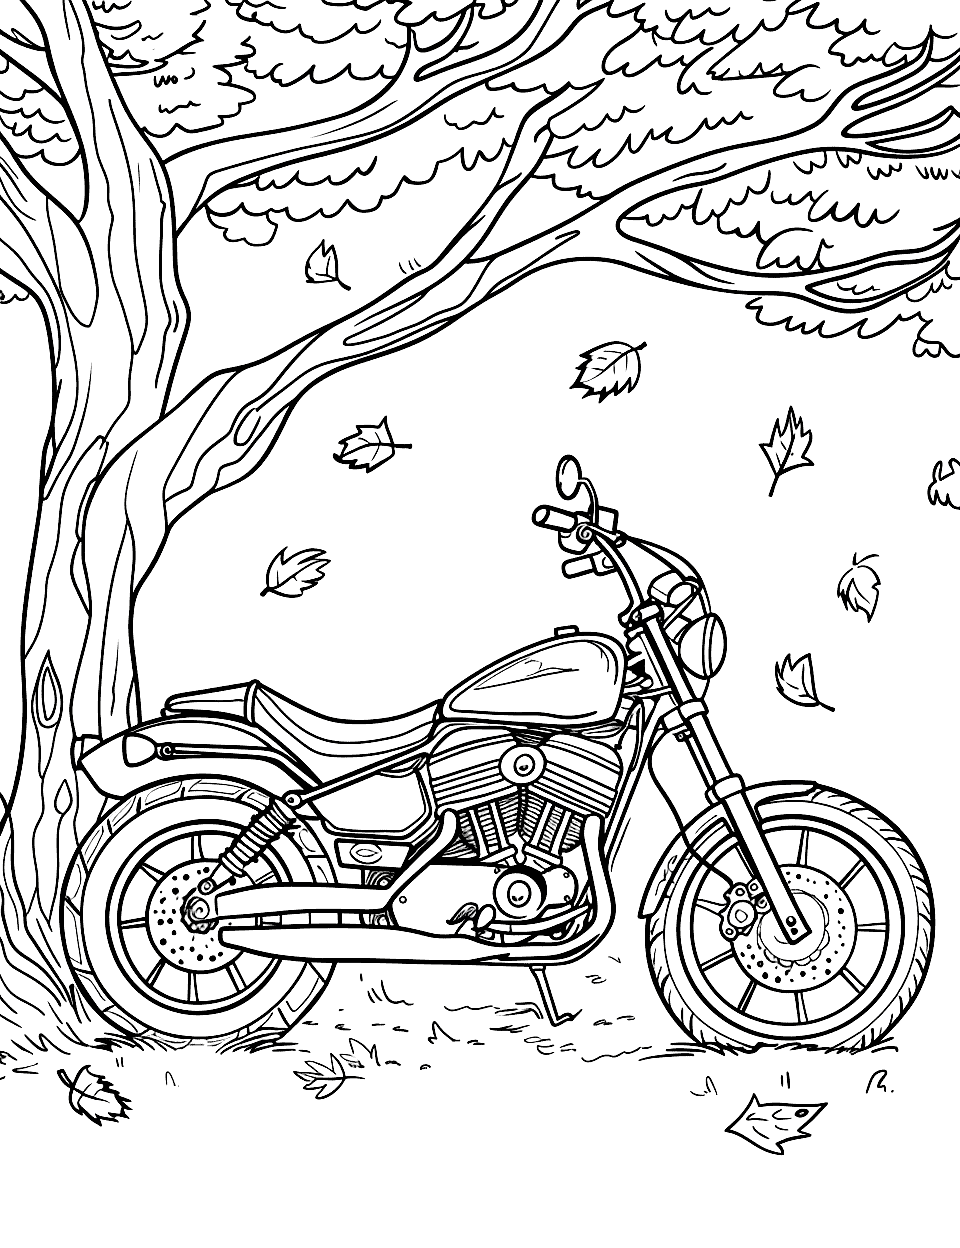 Motorcycle and Autumn Leaves Coloring Page - A motorcycle parked under a tree with autumn leaves falling around.